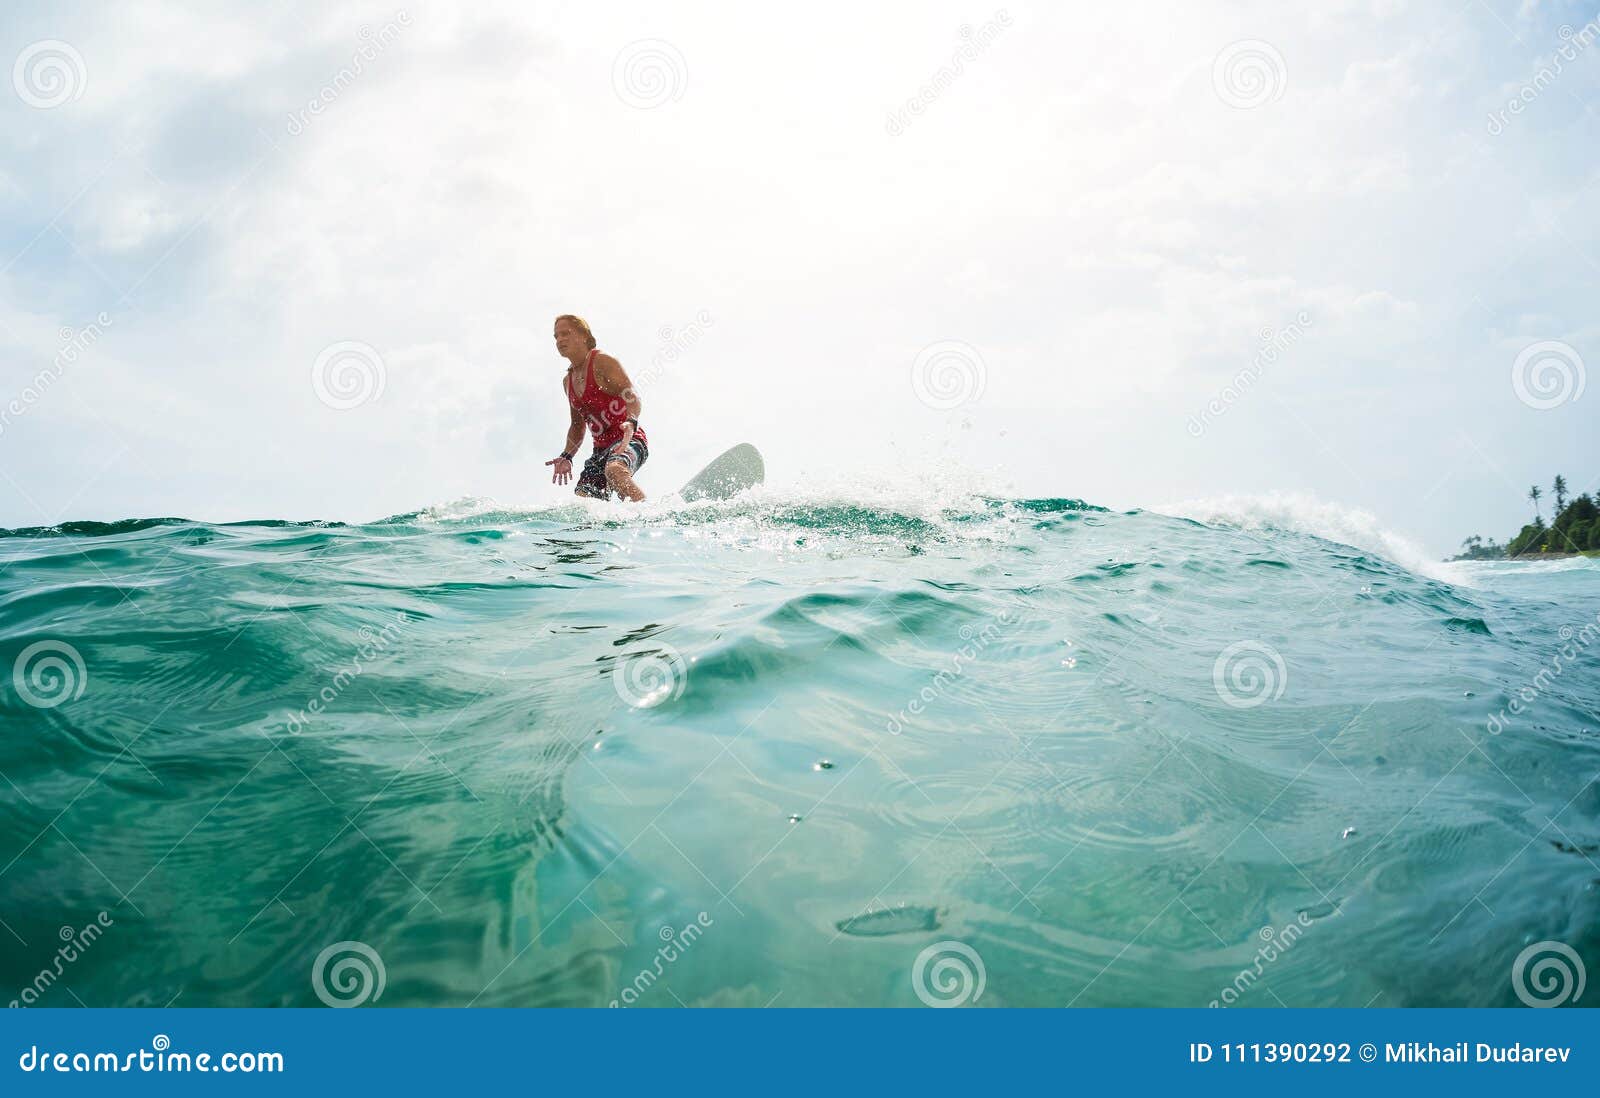 Surfer rides the wave stock photo. Image of sporty, ocean - 111390292